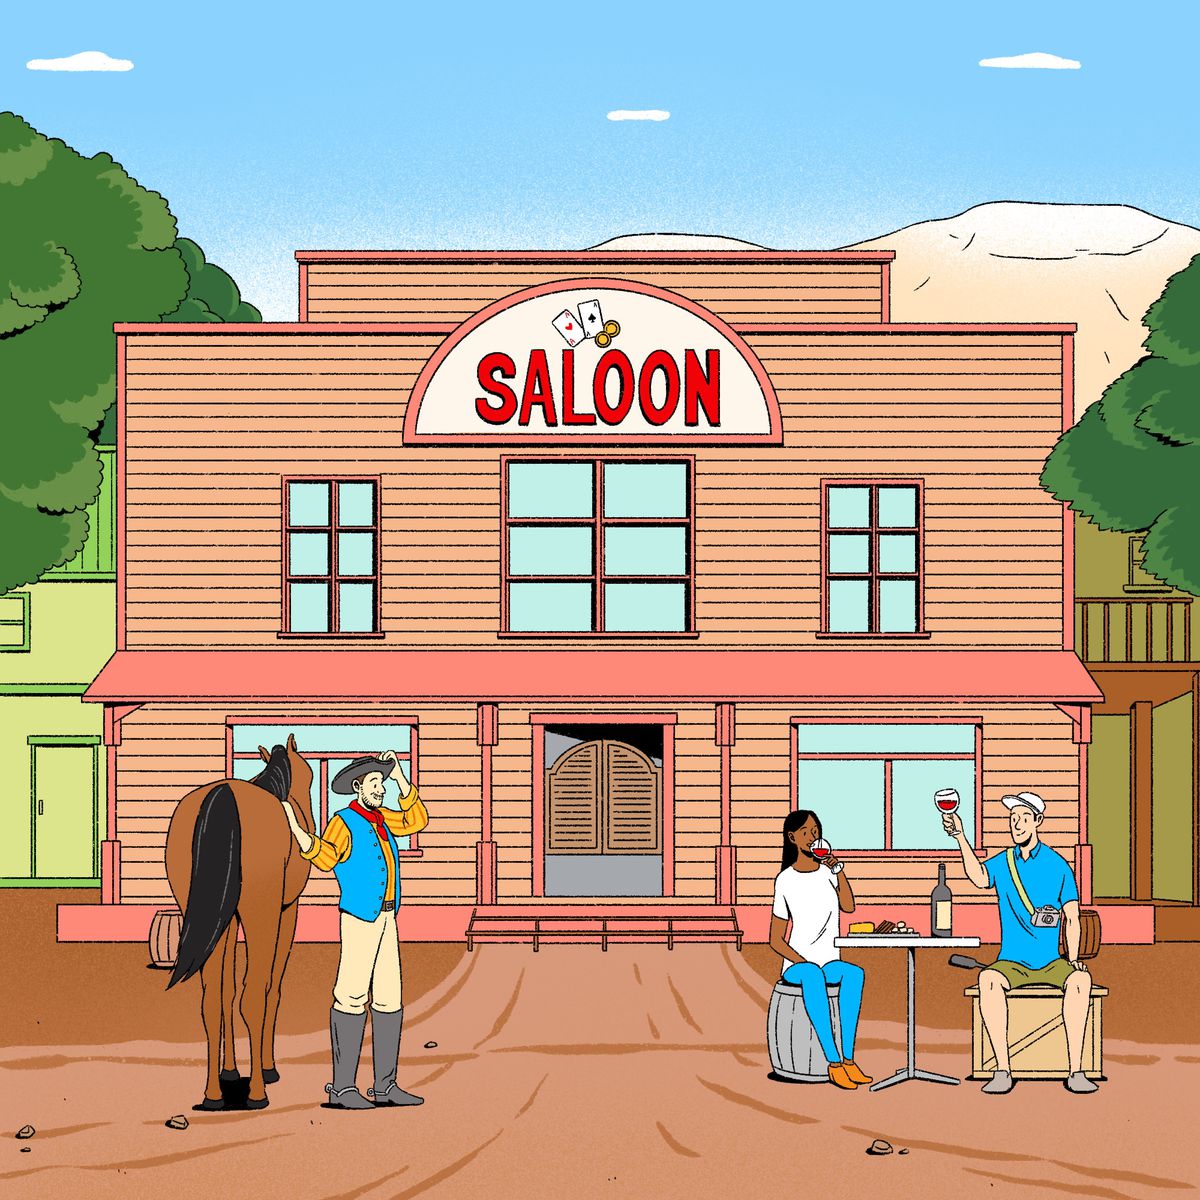 An illustration of a saloon with a Western facade and people enjoying drinks outside, one standing by a horse.